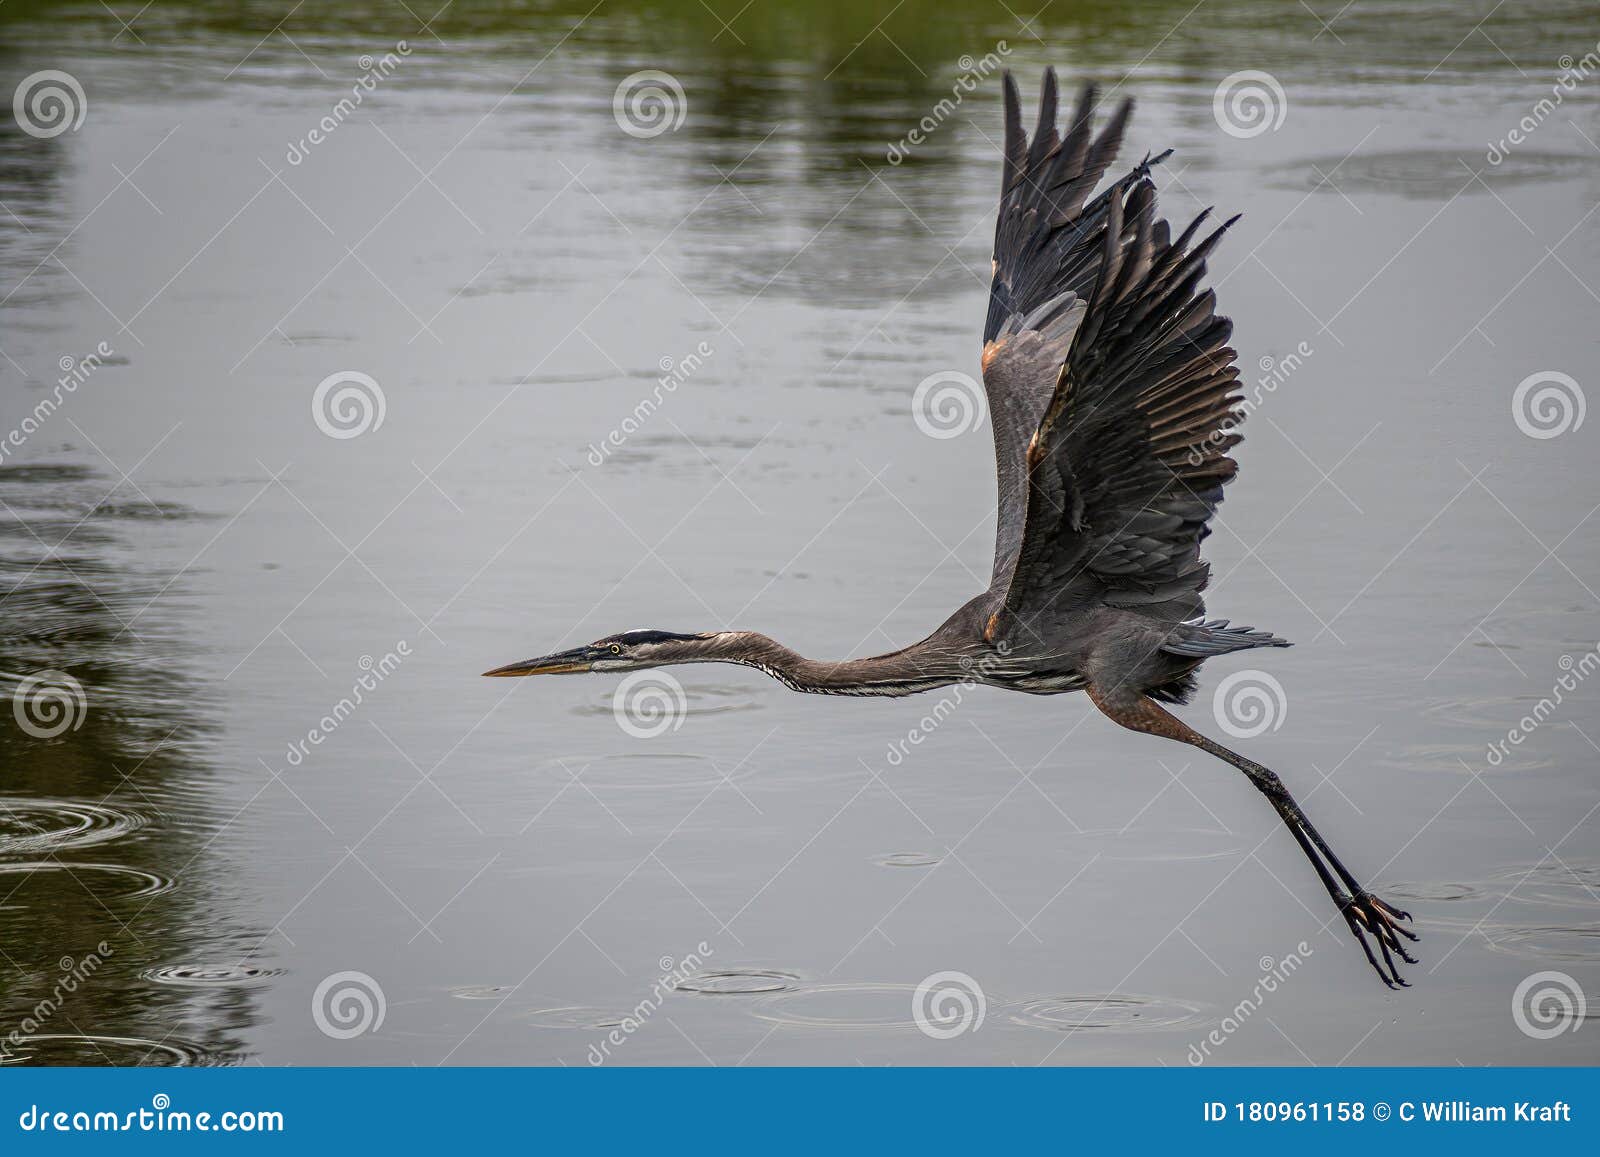 Great Blue Heron Above Water Surface Stock Photo - Image of great, feathering: 180961158